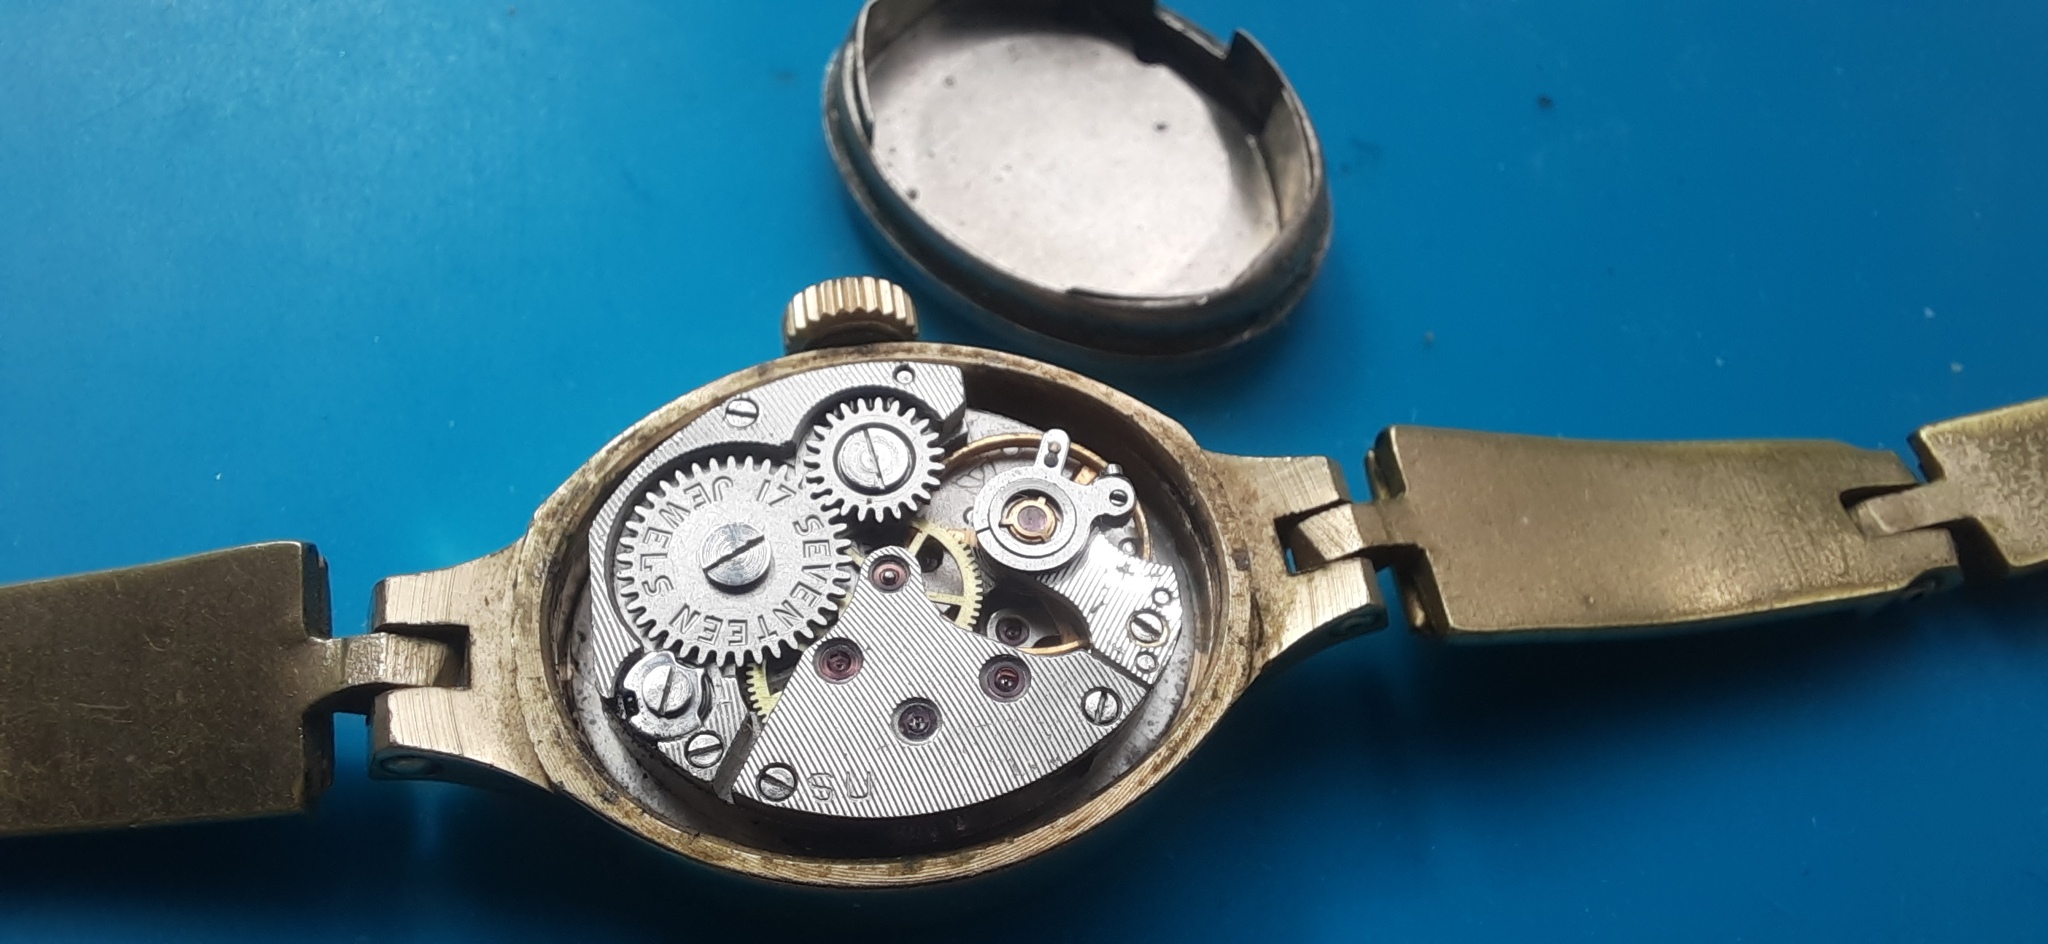 Is it possible to re-take off the women's watch Seagull? - My, Repair, Wrist Watch, Hobby, Moscow, Restoration, Video, Longpost, Rukozhop, Women's Watches